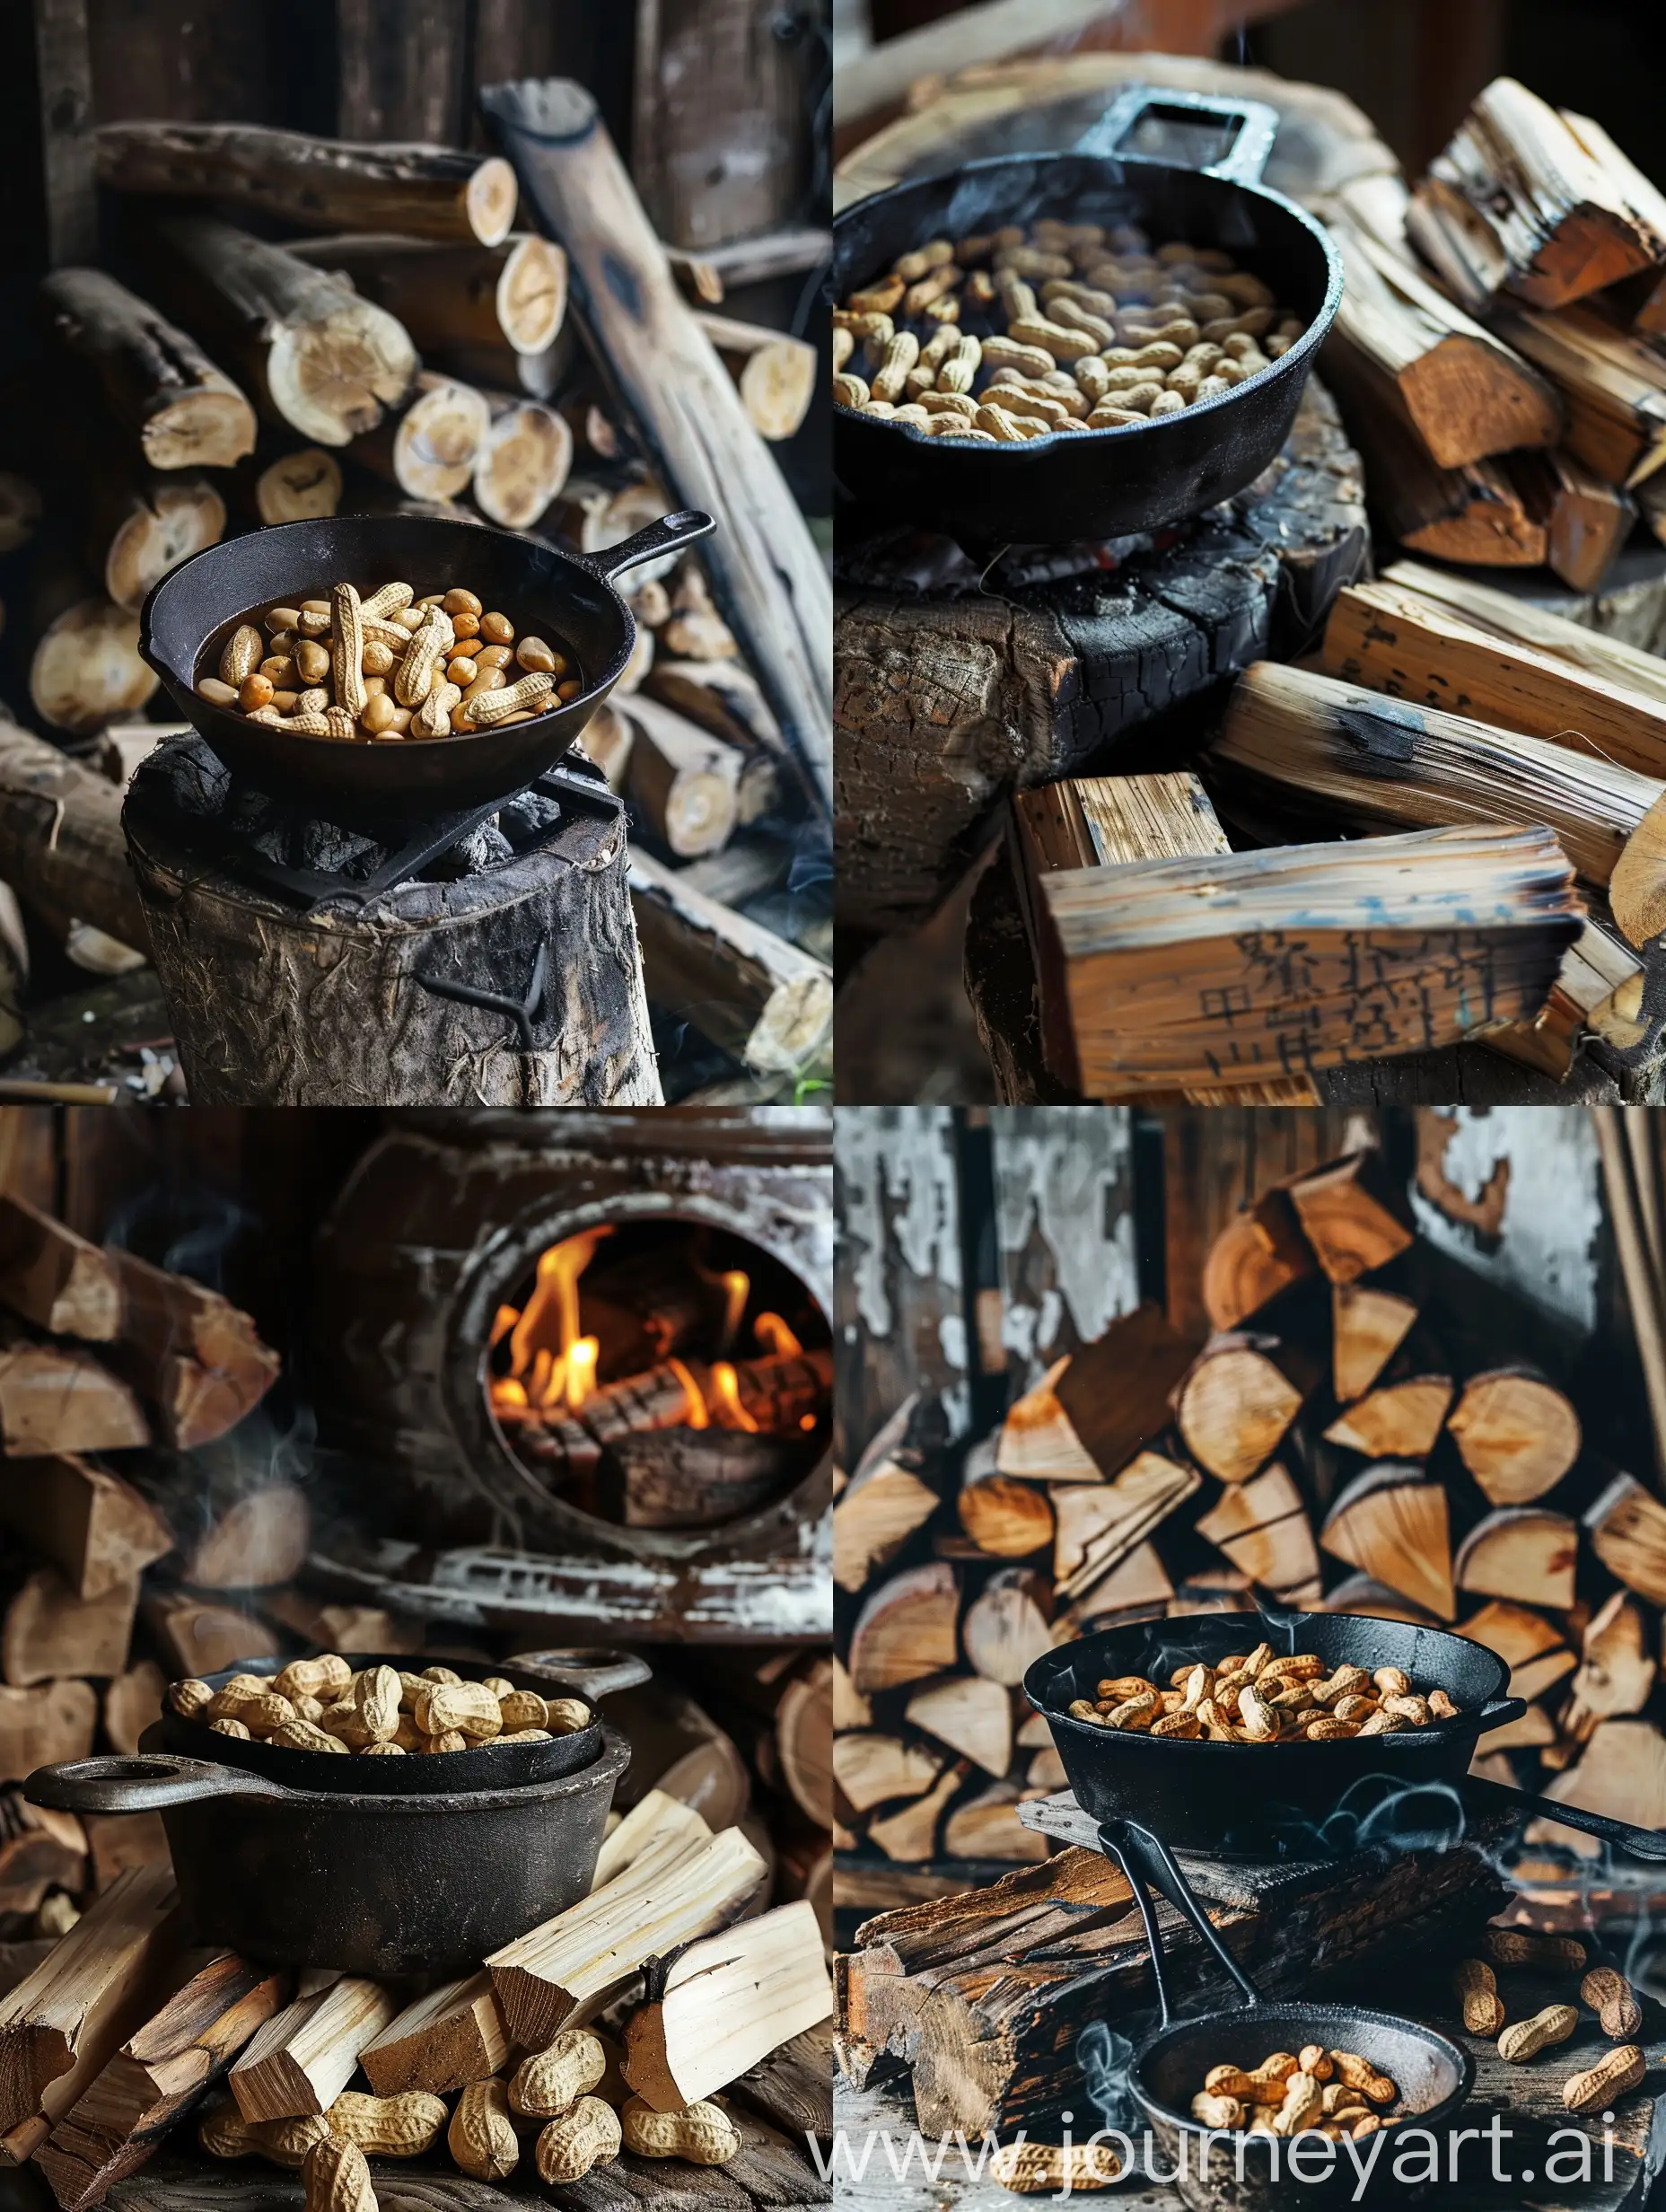 Traditional-Chinese-Peanut-Frying-Over-Nostalgic-1970s-Firewood-Stove